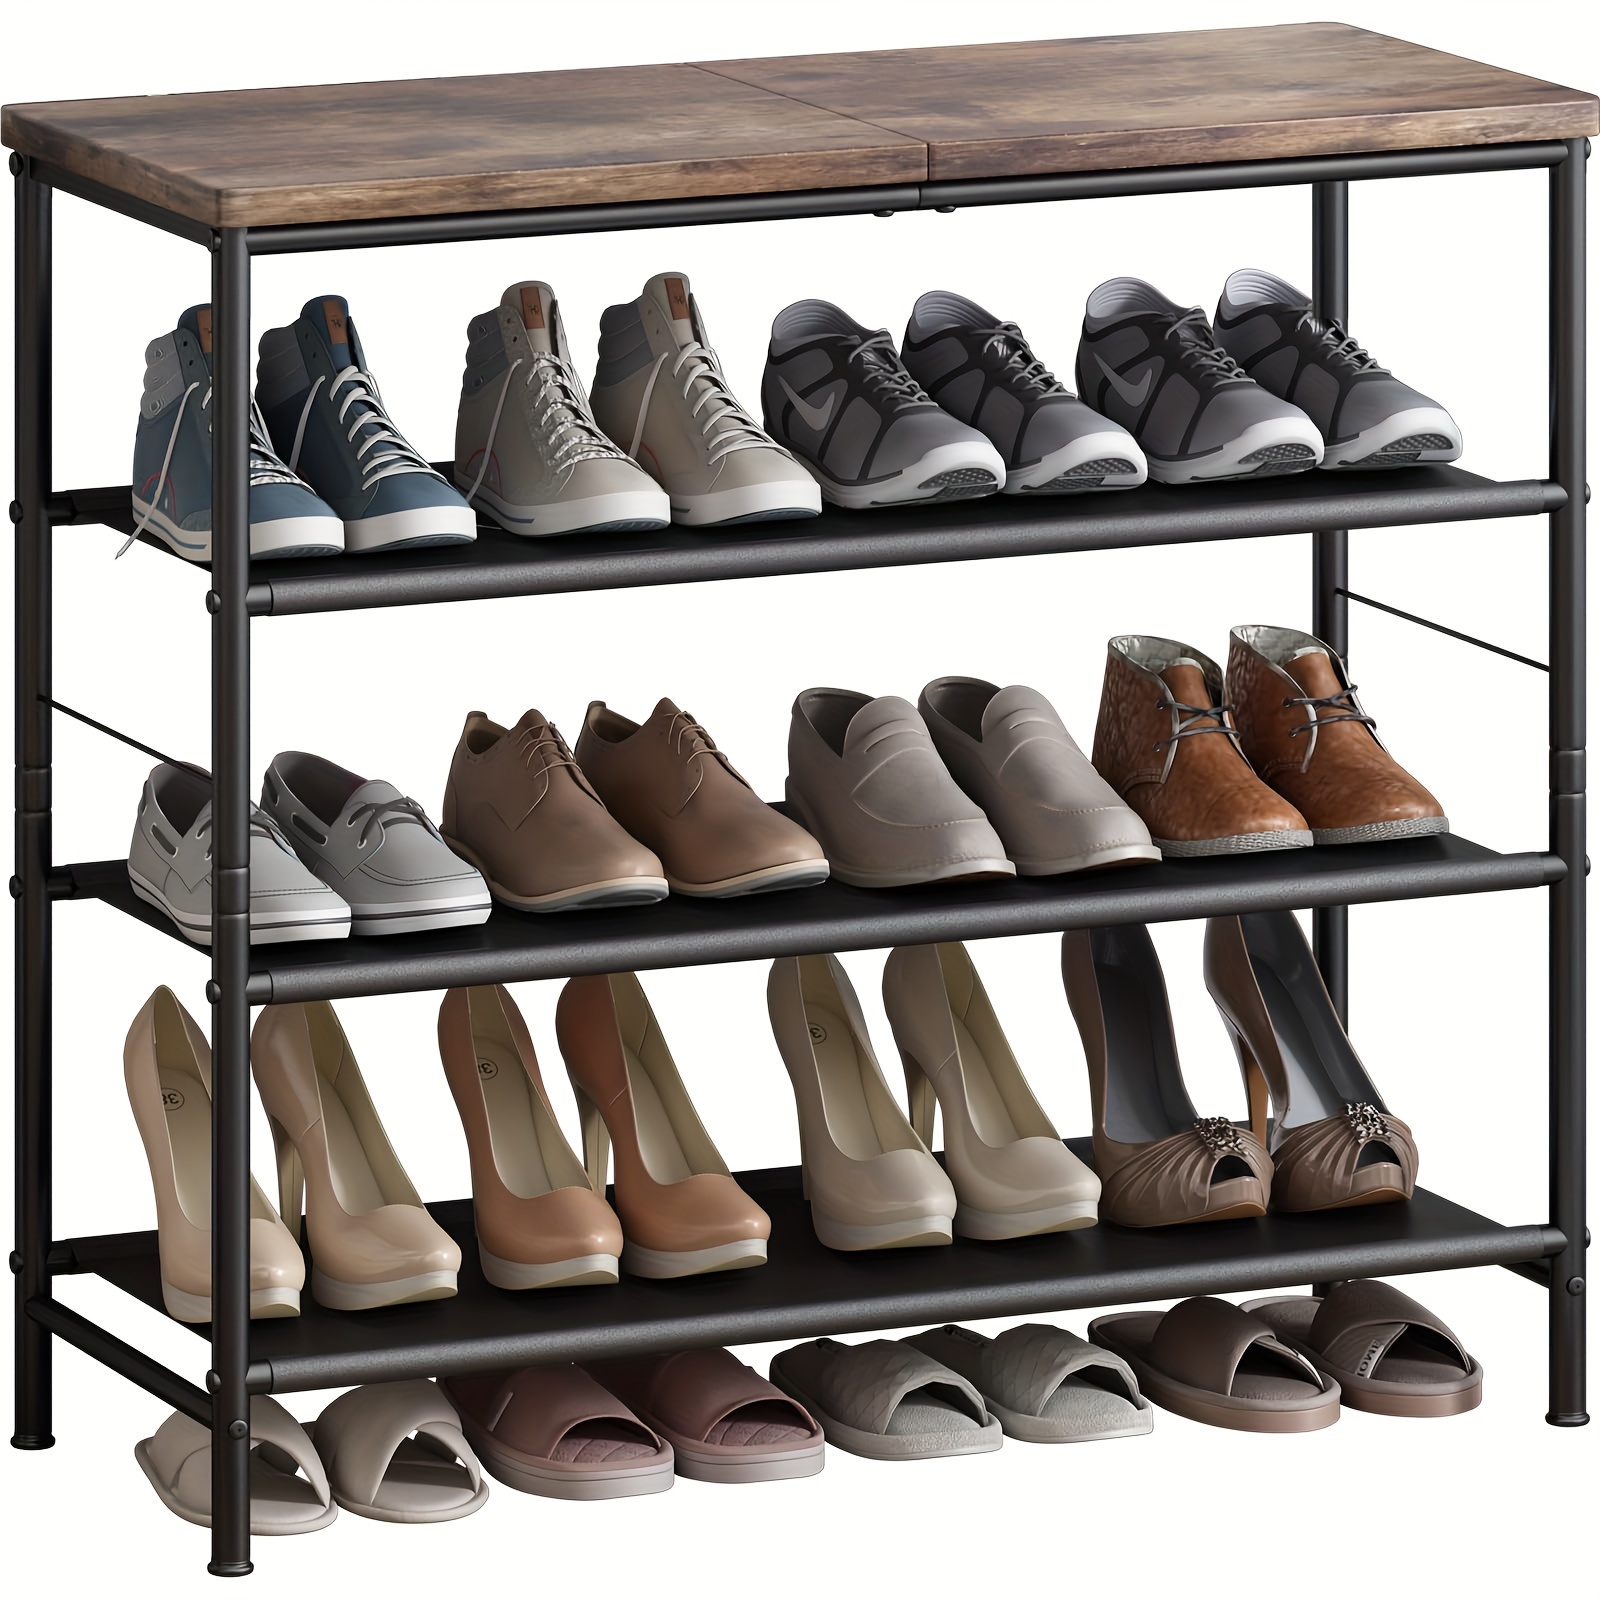 

Suoernuo Shoe Rack Organizer 4 Tier Metal Organizer Shelf With Industrial Mdf Board And Layer Fabric For Entryway Closet Bedroom Living Room Garage, Black & Rustic Brown